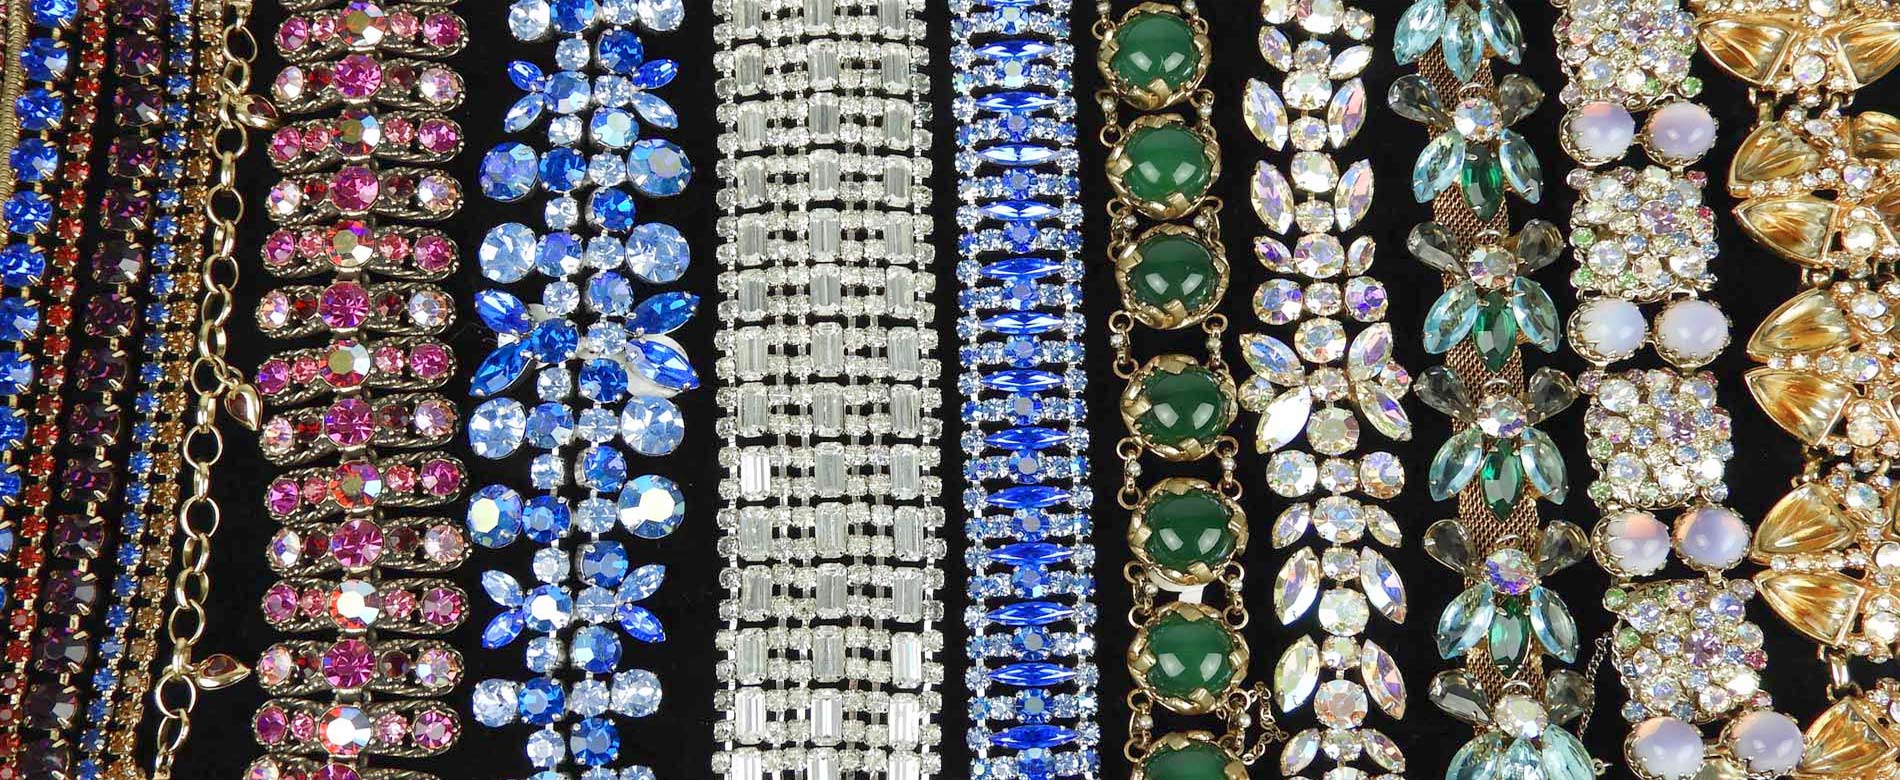 There is strong demand for quality vintage costume jewelry. Contact Victoria Murray!